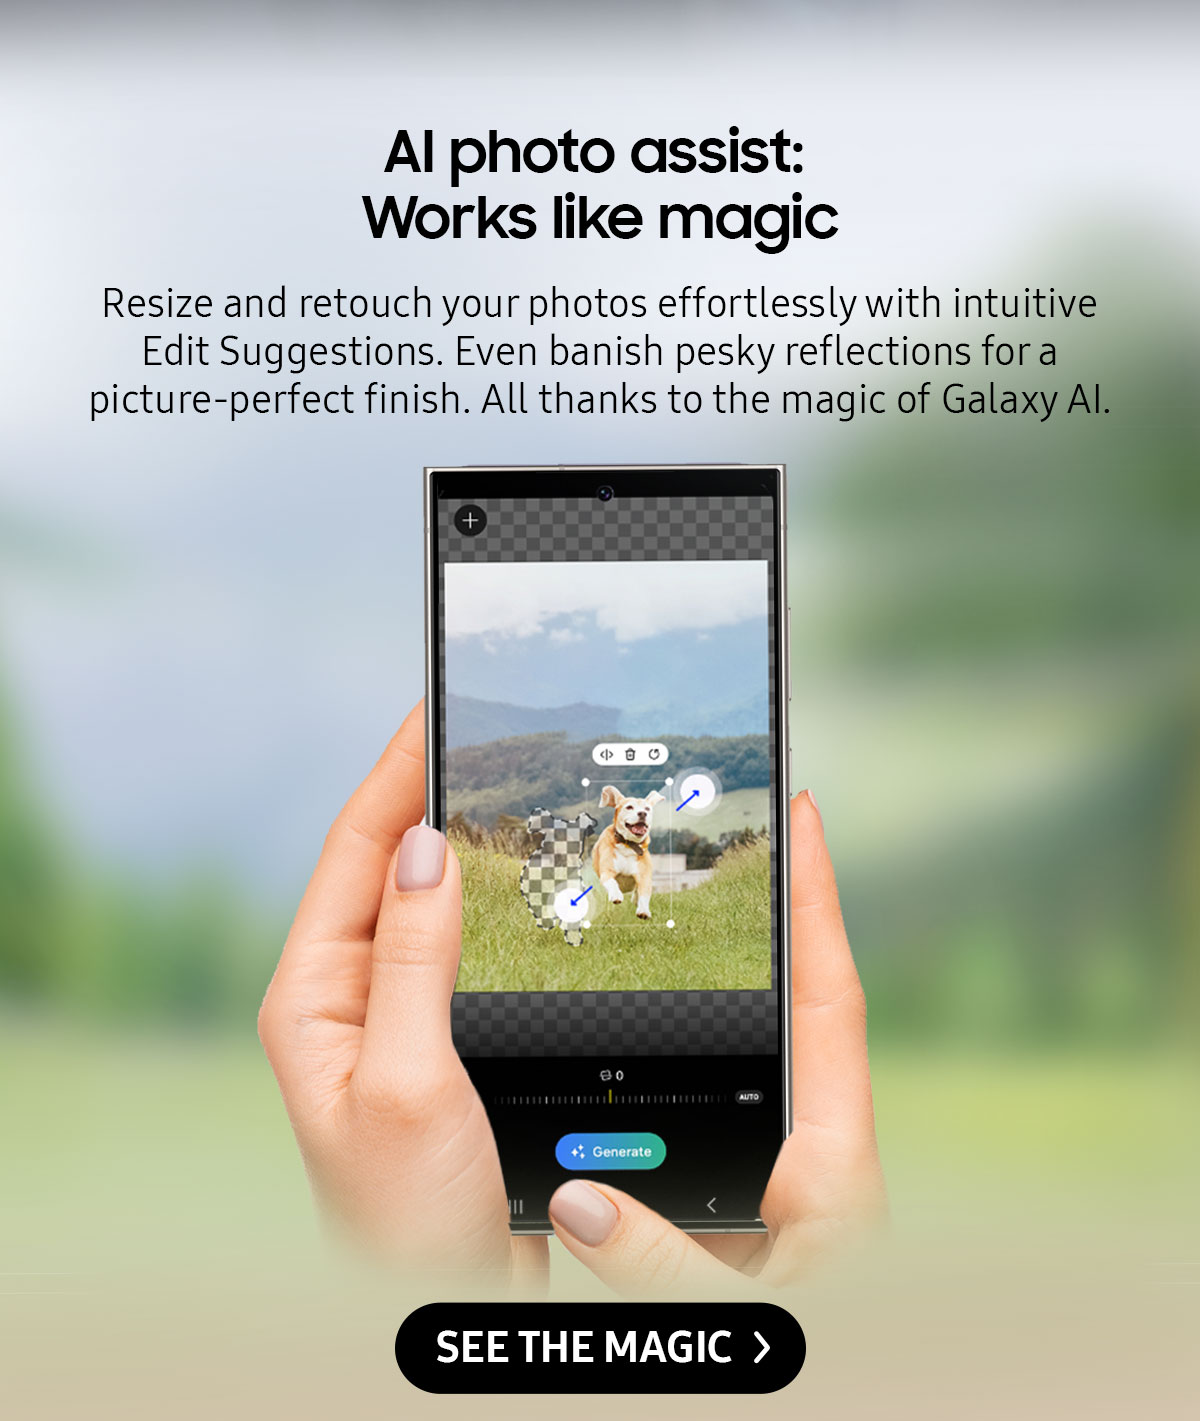 AI photo assist: Works like magic | Resize and retouch your photos effortlessly with intuitive Edit Suggestions. Even banish pesky reflections for a picture-perfect finish. All thanks to the magic of Galaxy Al.